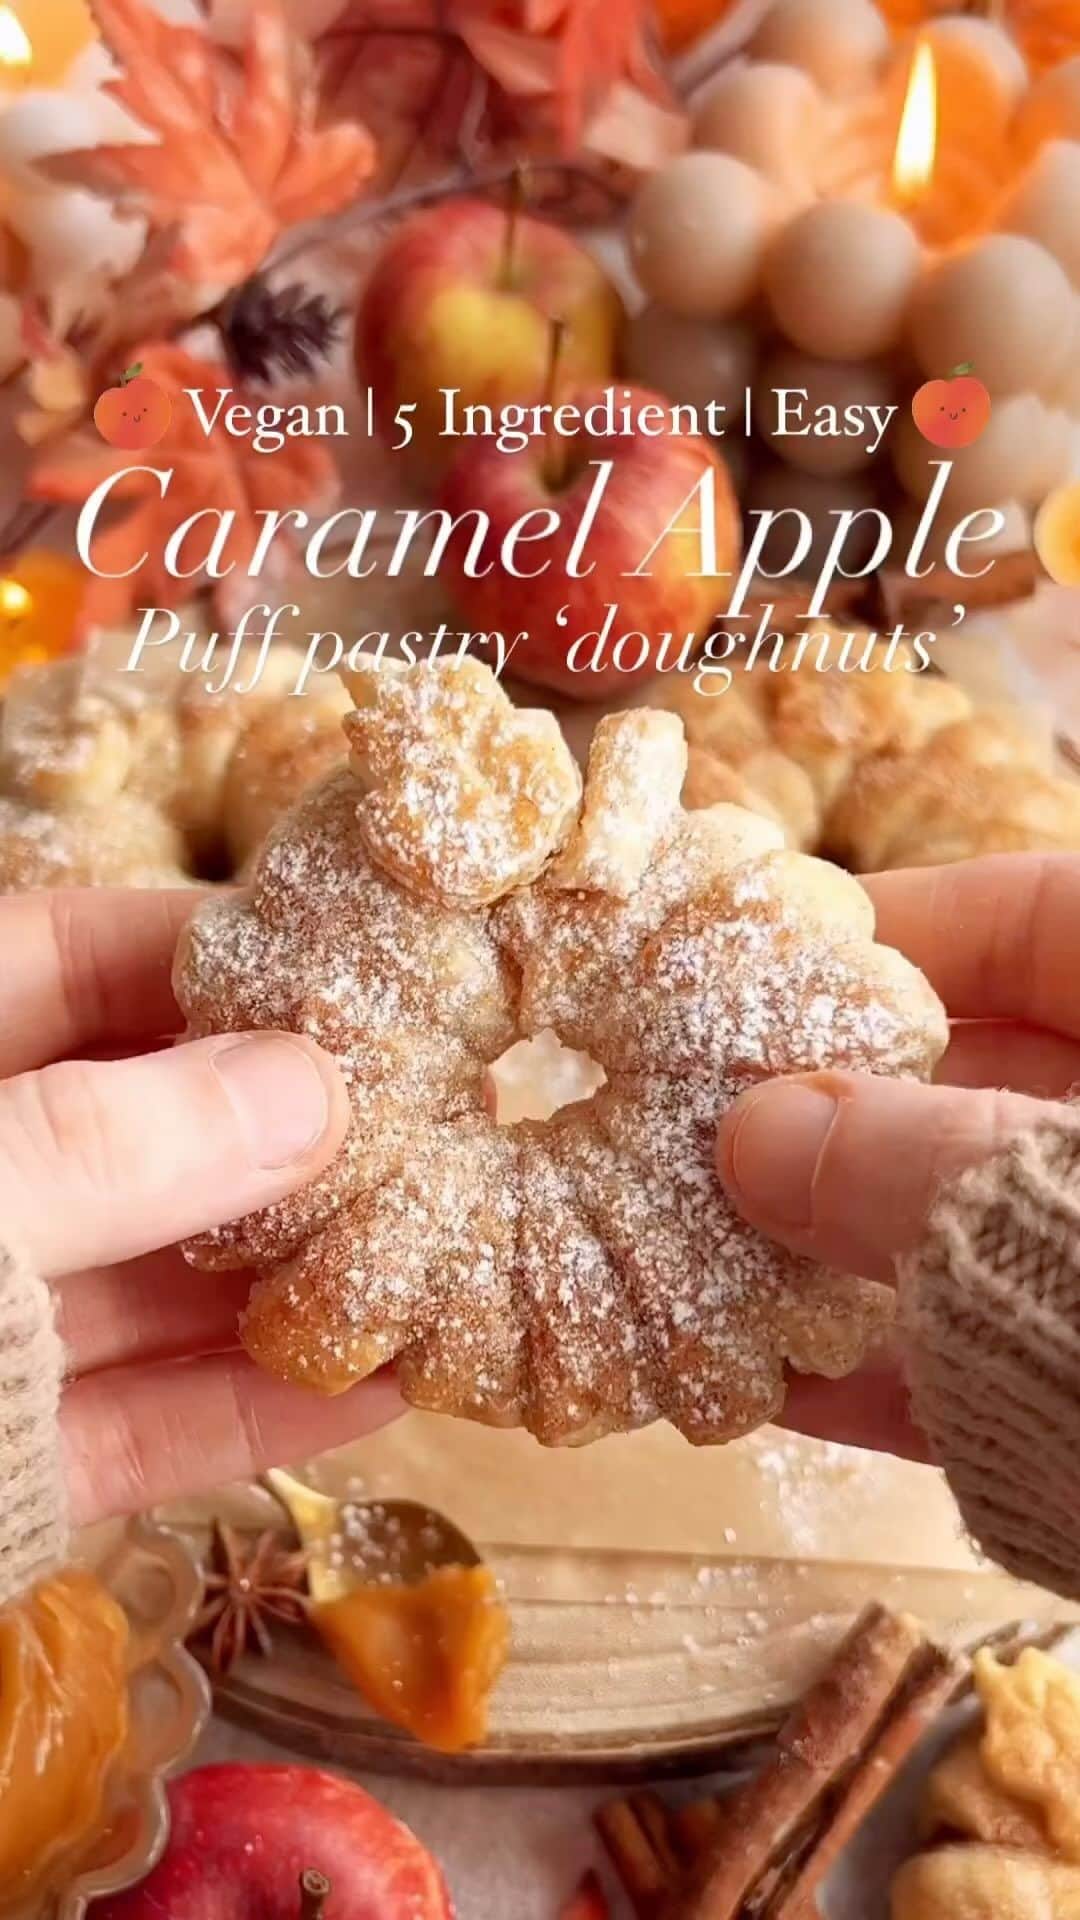 Sharing Healthy Snack Ideasのインスタグラム：「Caramel Apple ‘Doughnuts’🍎 YAY or NAY? Who wants one?? By • @thelittleblogofvegan  Raining outside… so bake some cozy pastries with me 🍂 UNBELIEVABLY flakey puff pastry is wrapped around fresh apple slices coated in cinnamon sugar served with caramel sauce🤤 Vegan, no-egg, no-dairy, gluten-free option & 5 ingredients. The perfect treat for Autumn / Fall 🍎🍂 🍎Vegan + GF puff pastry sheets 🍯Caster / granulated sugar 🍎Ground cinnamon 🍯Apples 🍎Dairy-free milk 🍯Vegan caramel sauce .」